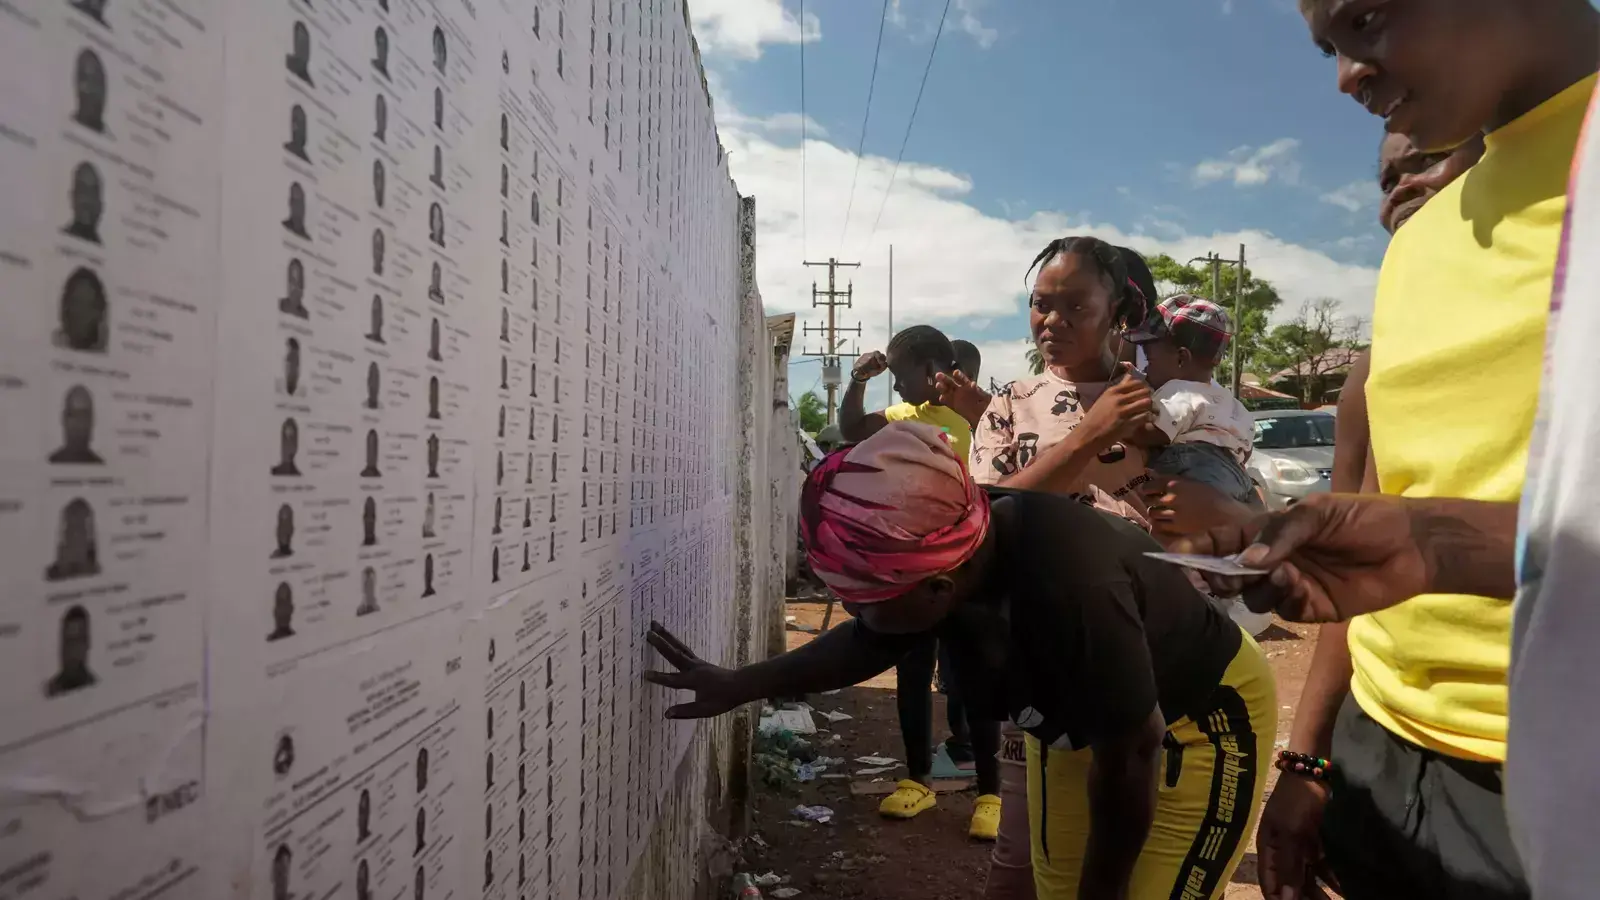 Liberian voters search for their name on electoral lists before they cast their votes during Liberia's presidential election in Monrovia, Liberia on October 10, 2023.